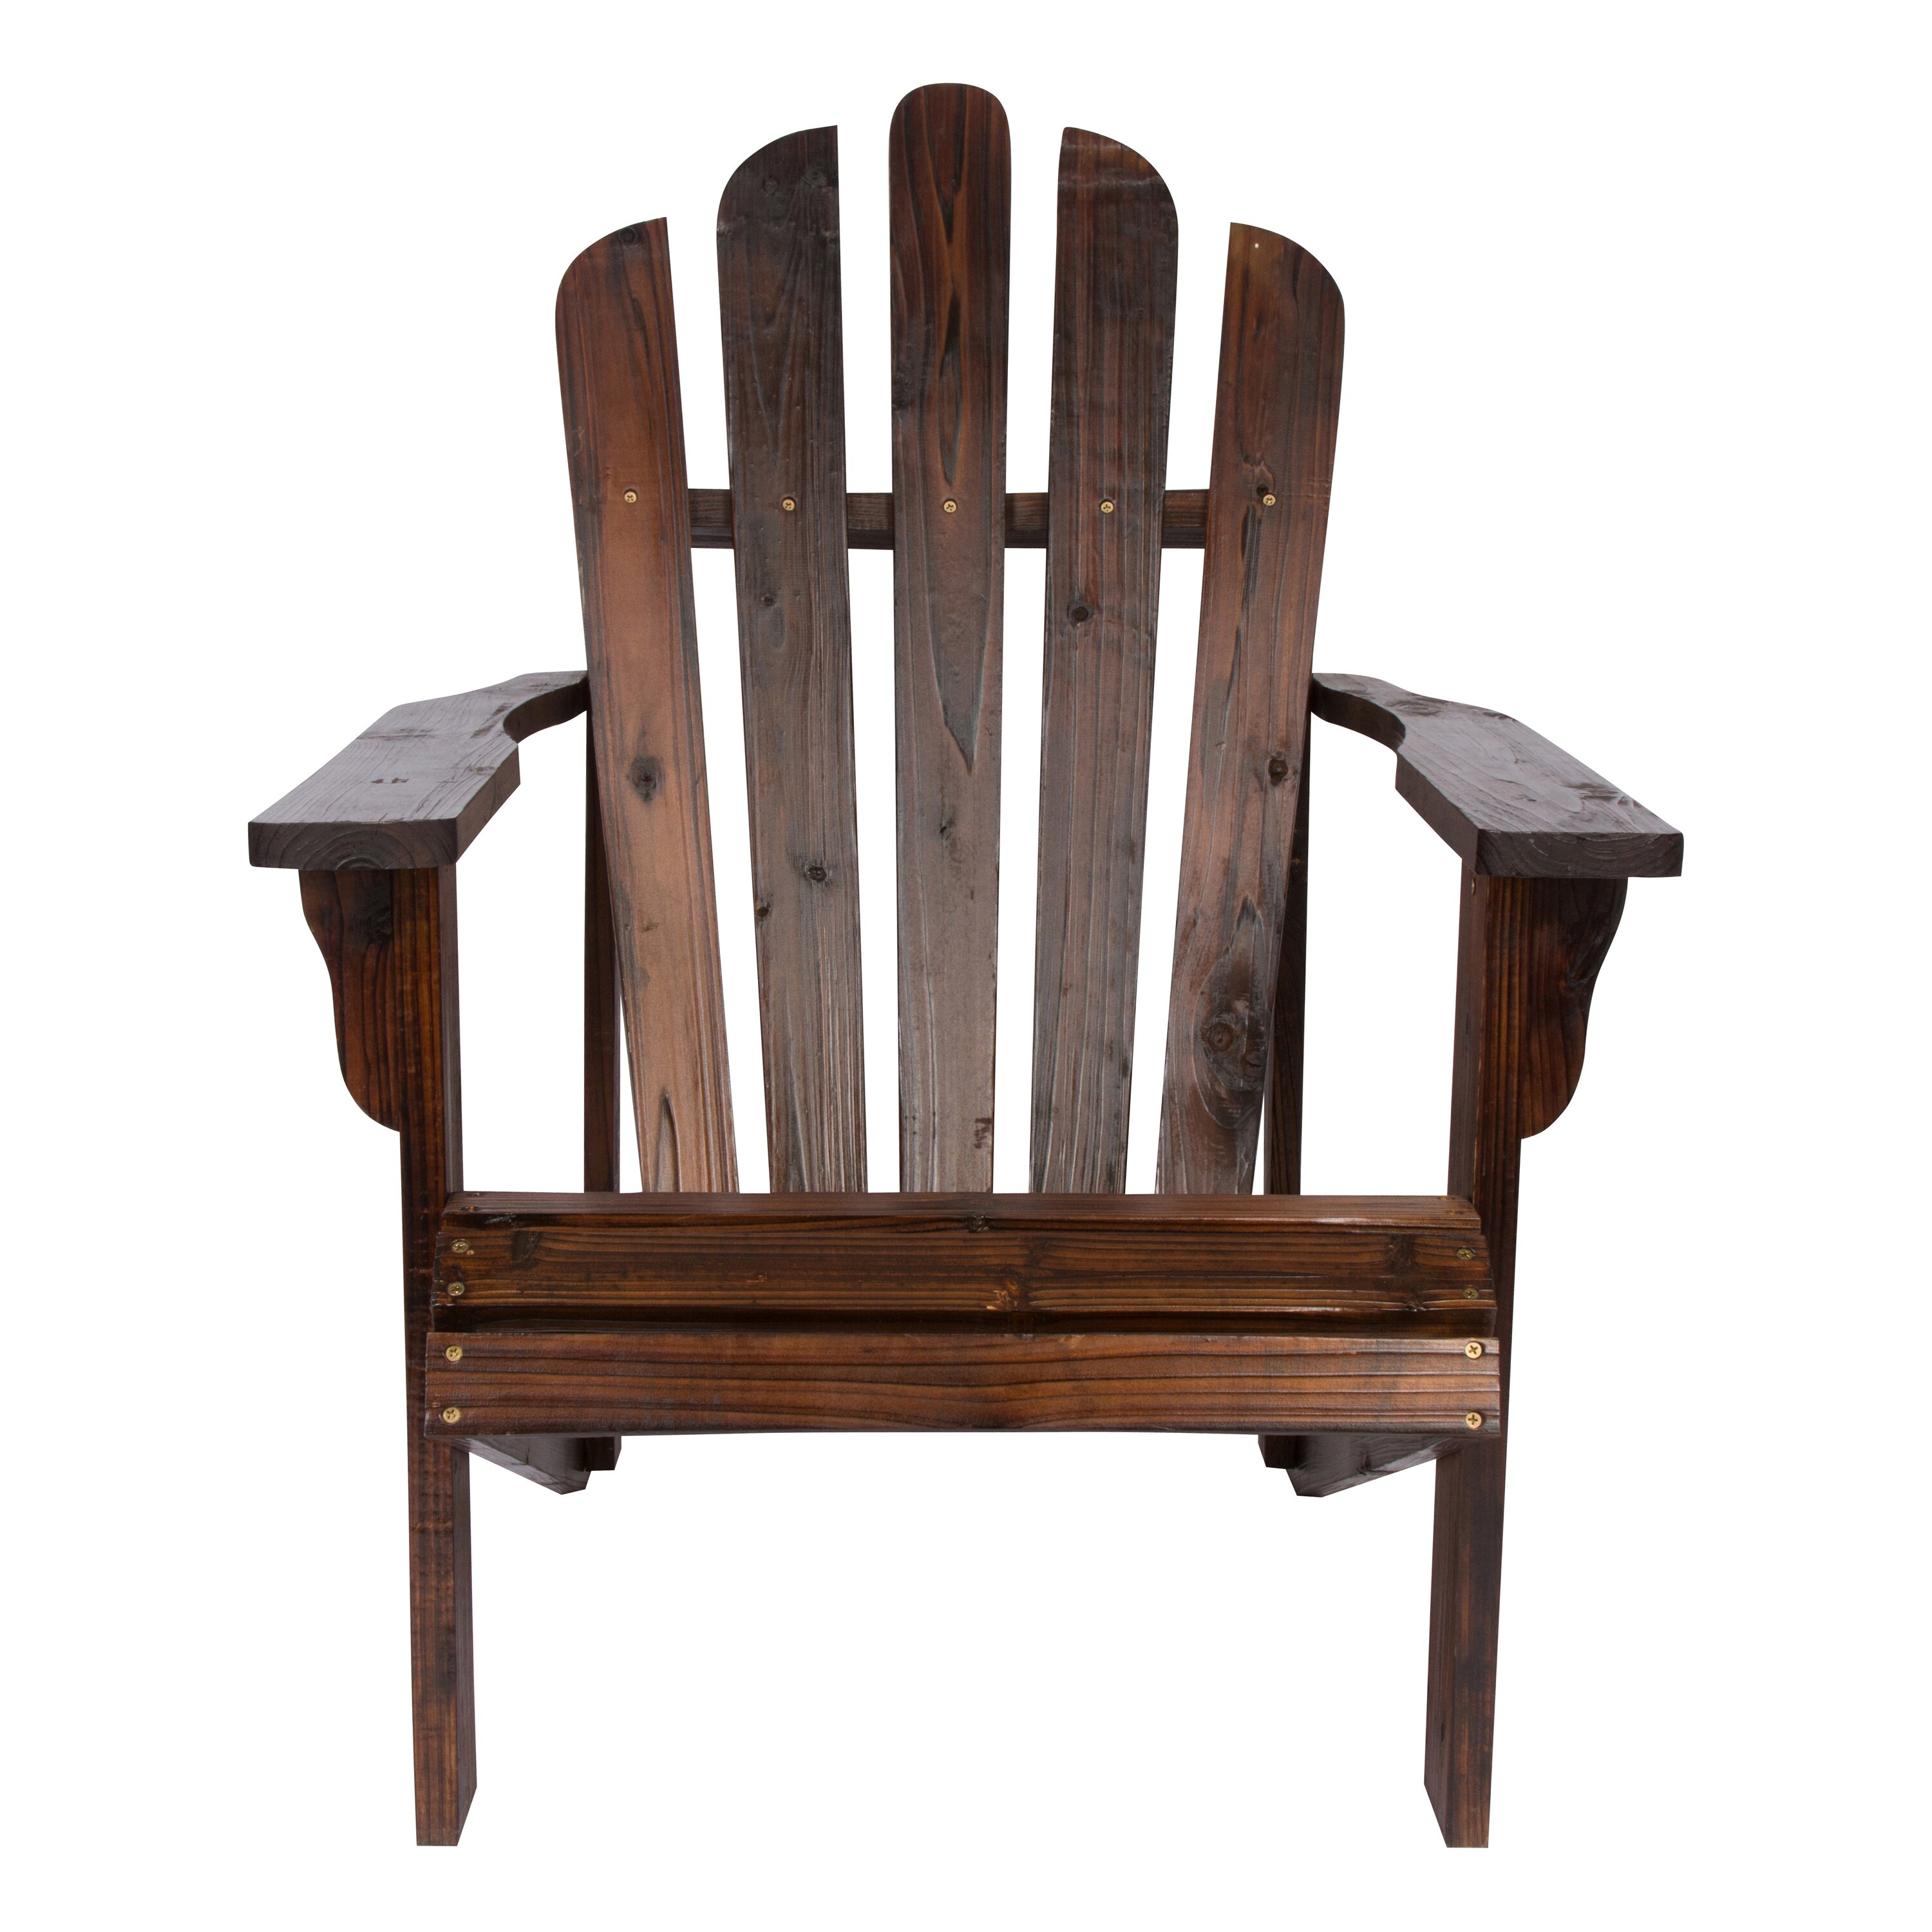 Remedy Wood Adirondack Chair And Folding Table Set